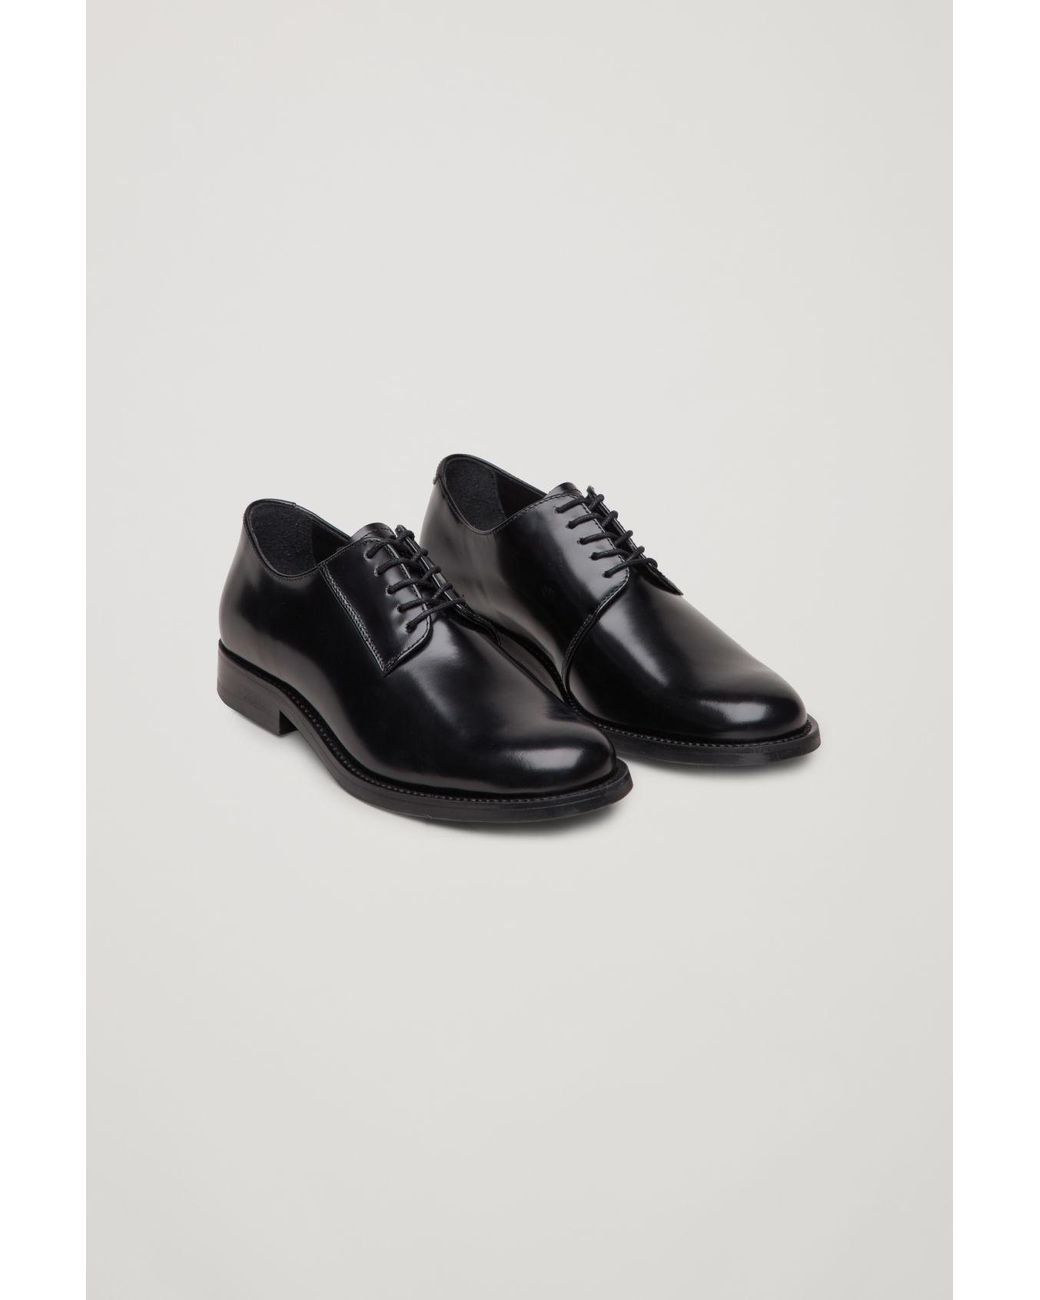 COS Round-toe Leather Oxford Shoes in Black | Lyst